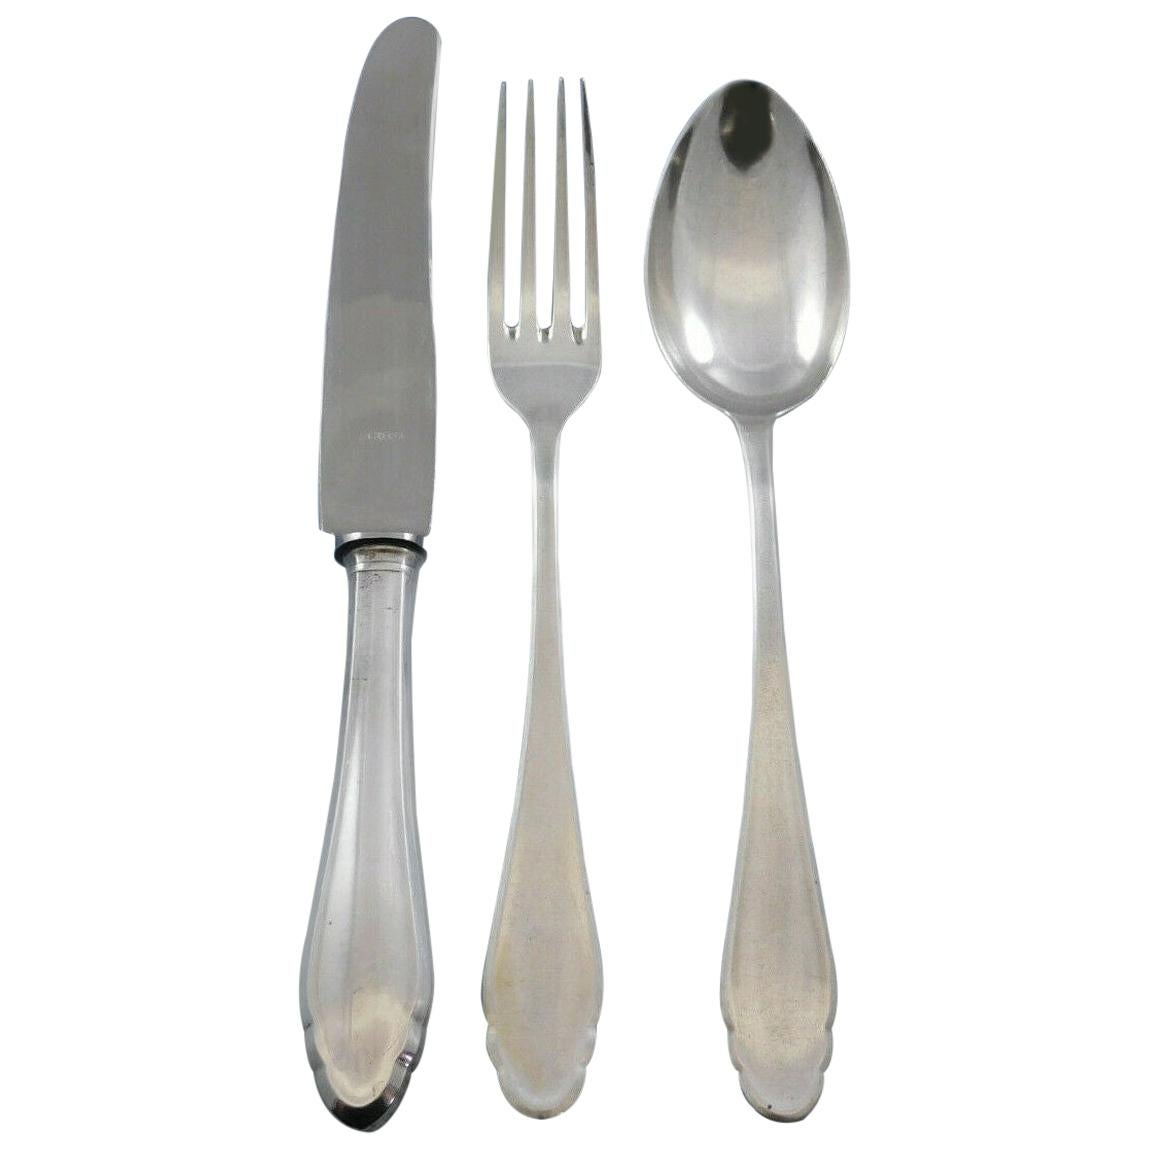 George Roth & Co. (Germany) 800 silver flatware set - 17 pieces. This set includes:

6 dinner knives, (4 - 10 3/8